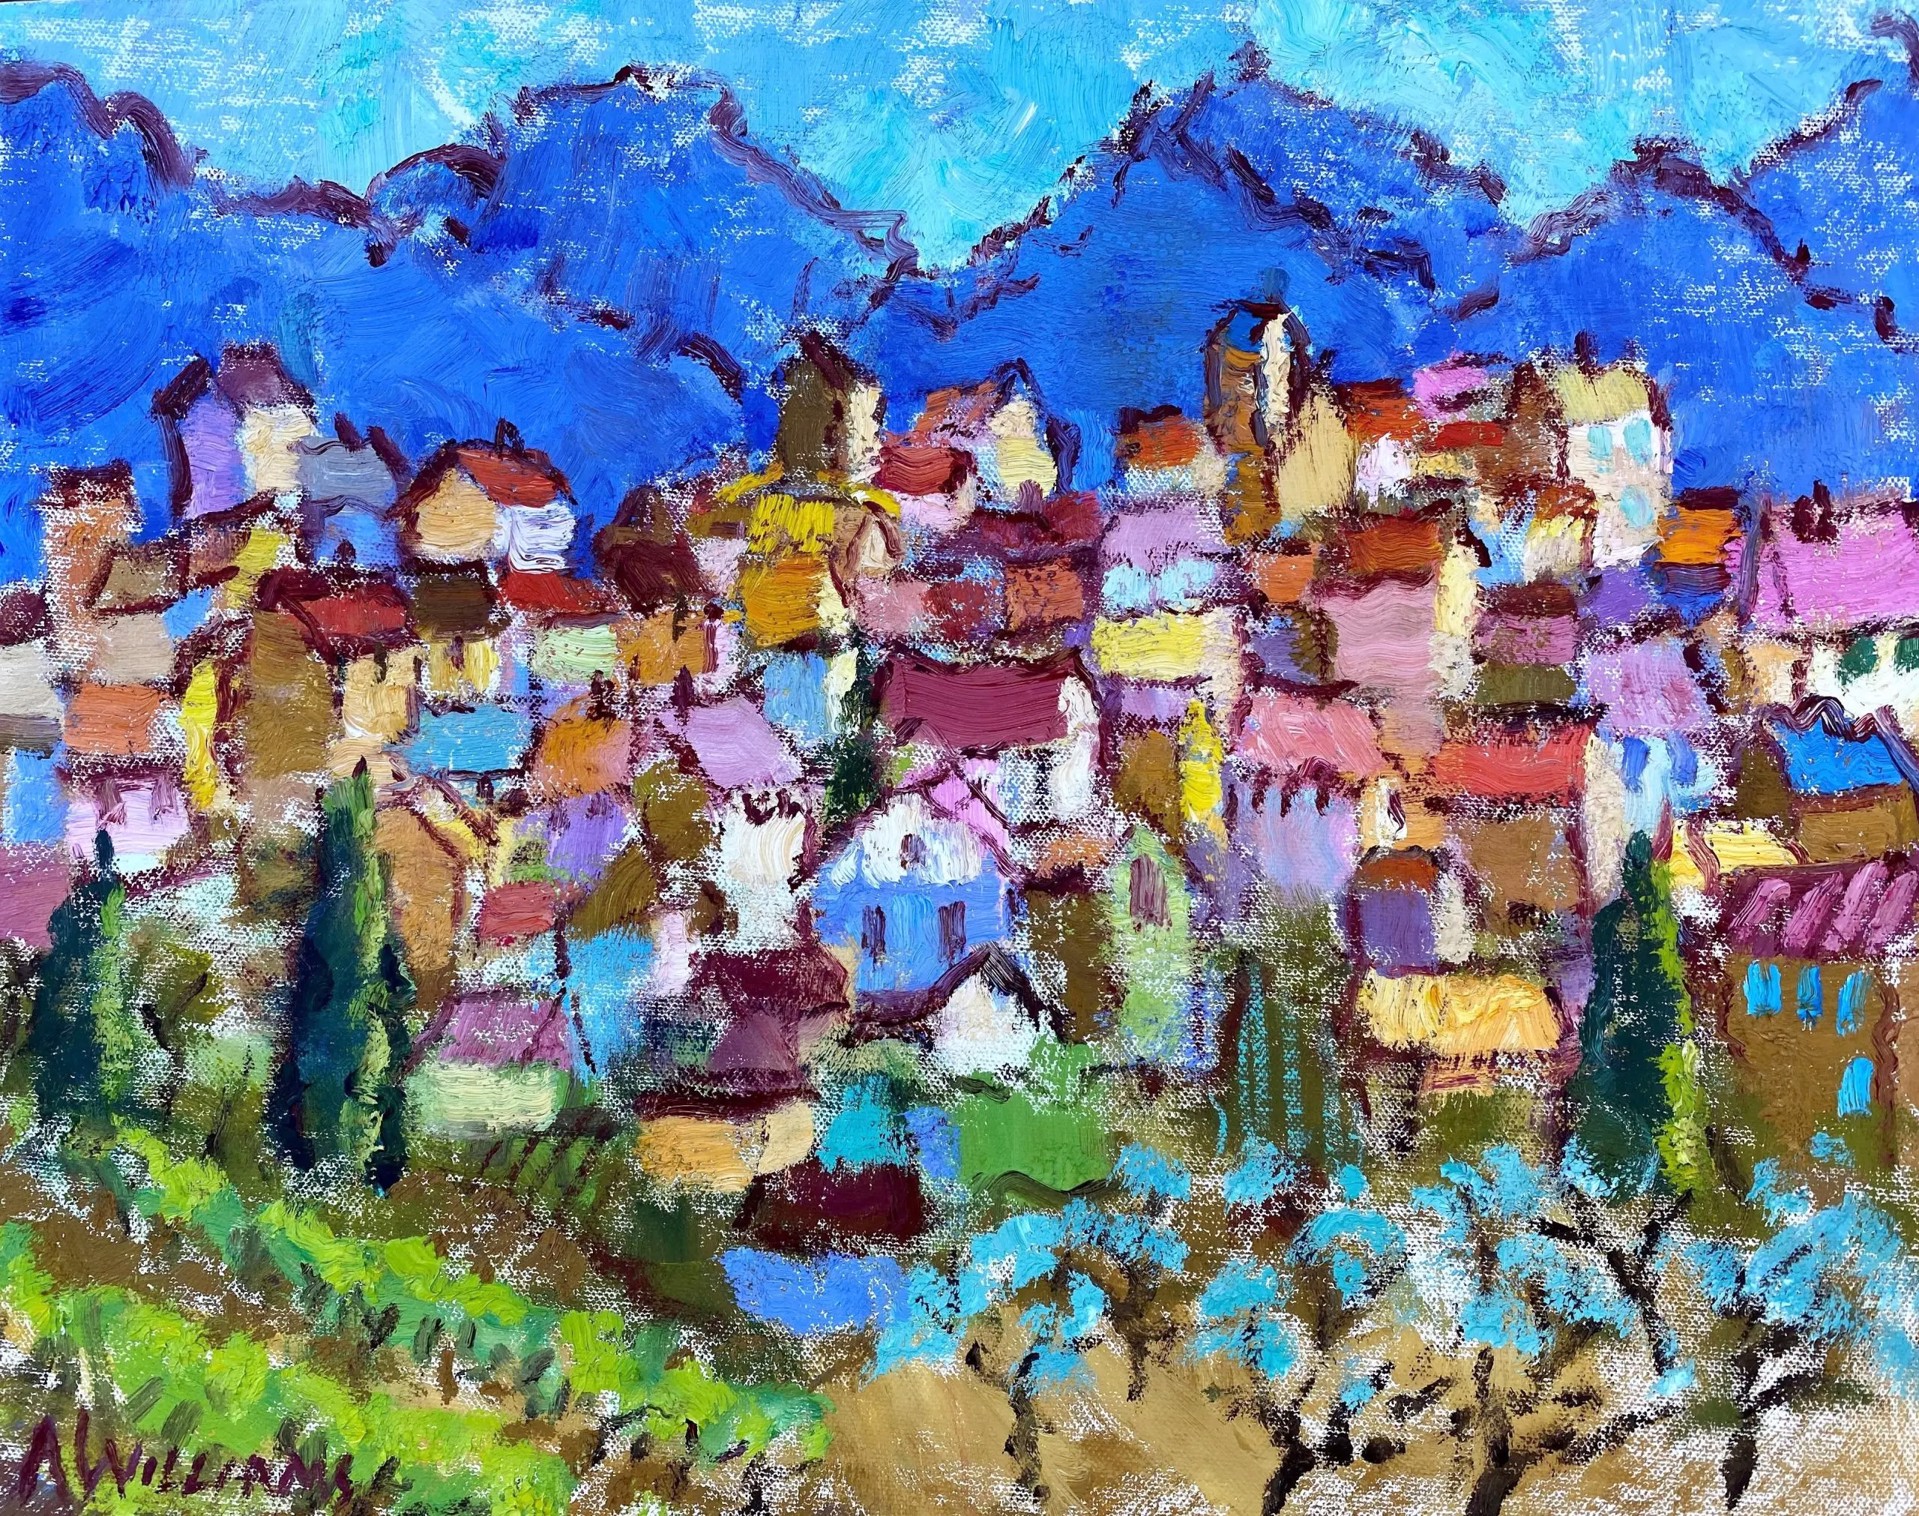 "Lourmarin's Beauty" original oil painting by Alice Williams